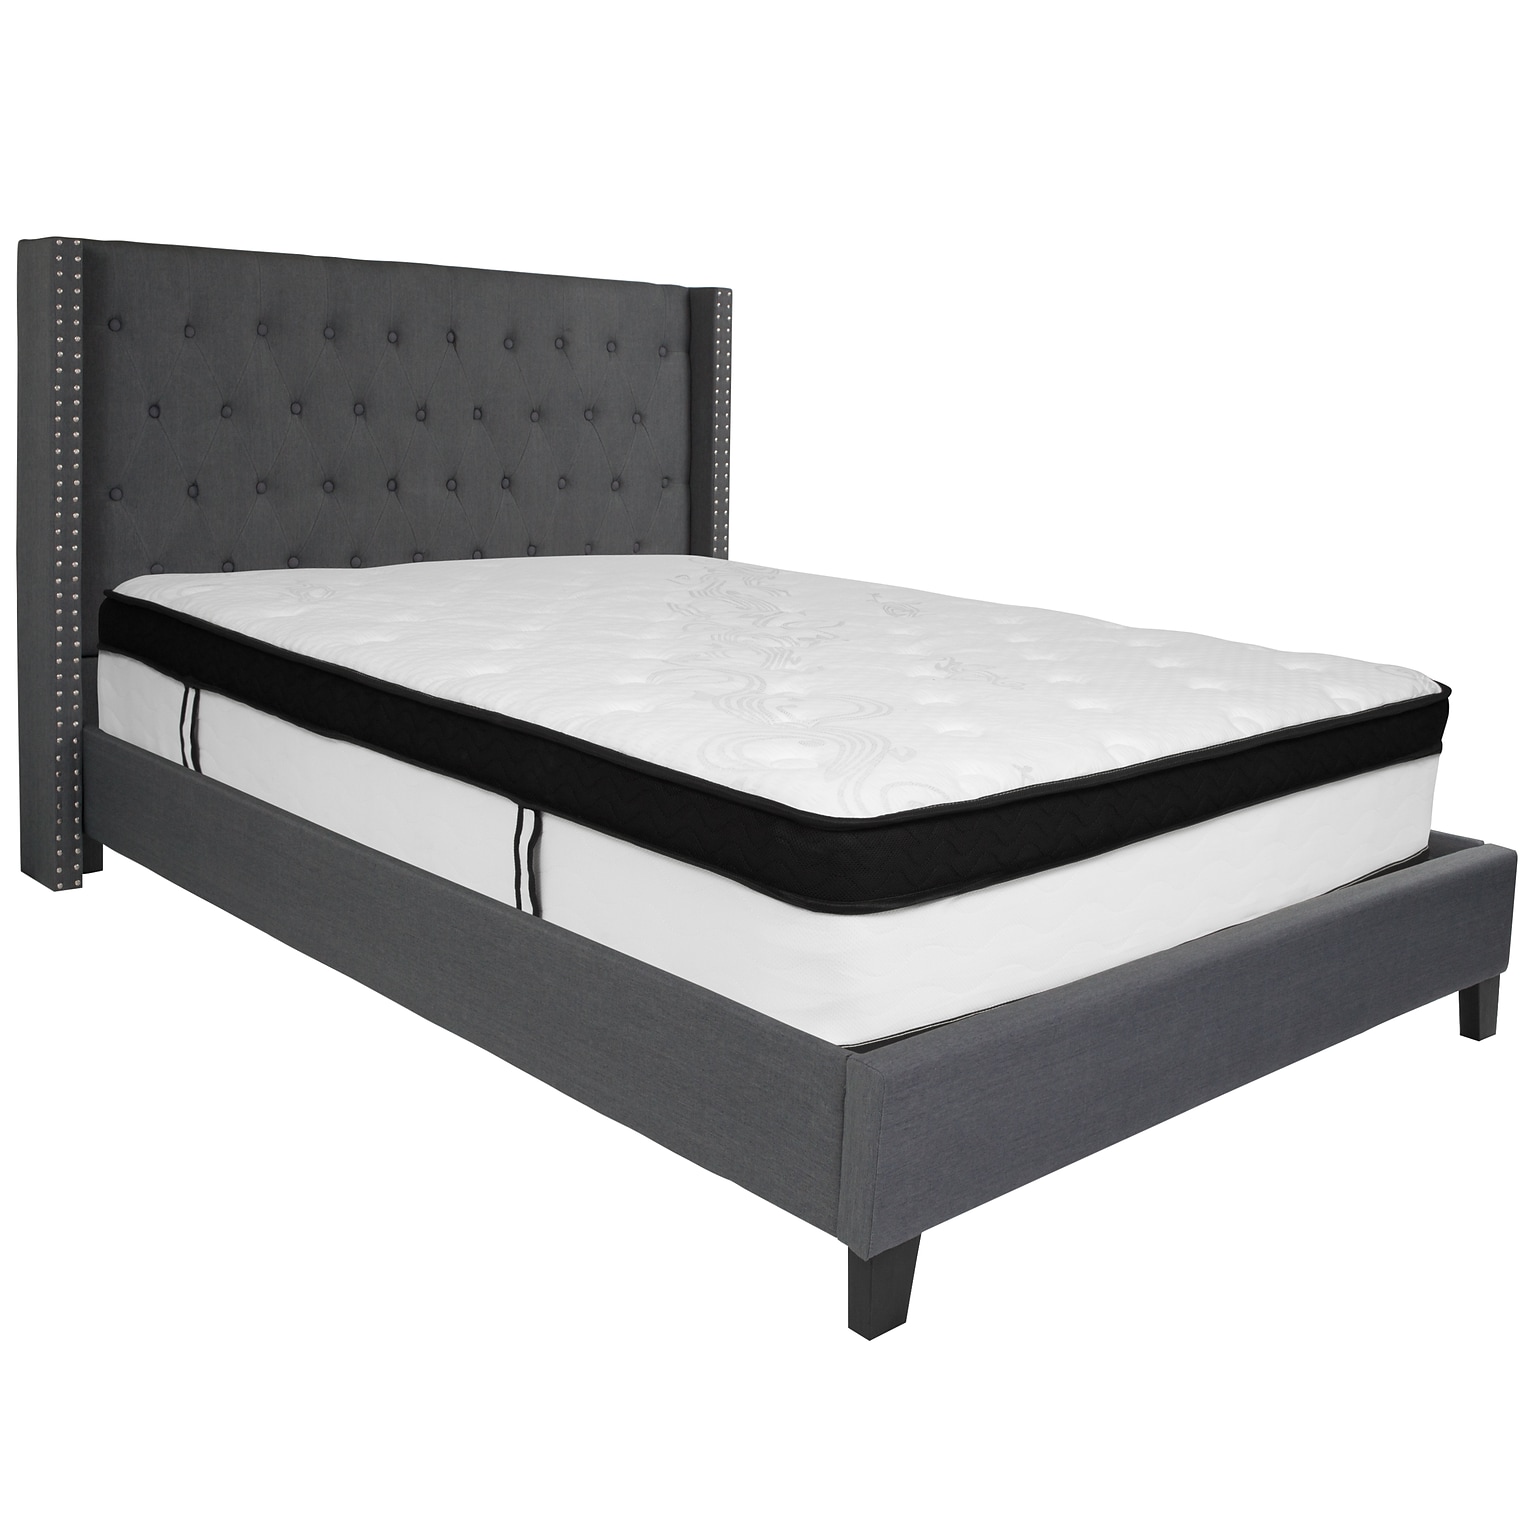 Flash Furniture Riverdale Tufted Upholstered Platform Bed in Dark Gray Fabric with Memory Foam Mattress, Queen (HGBMF47)